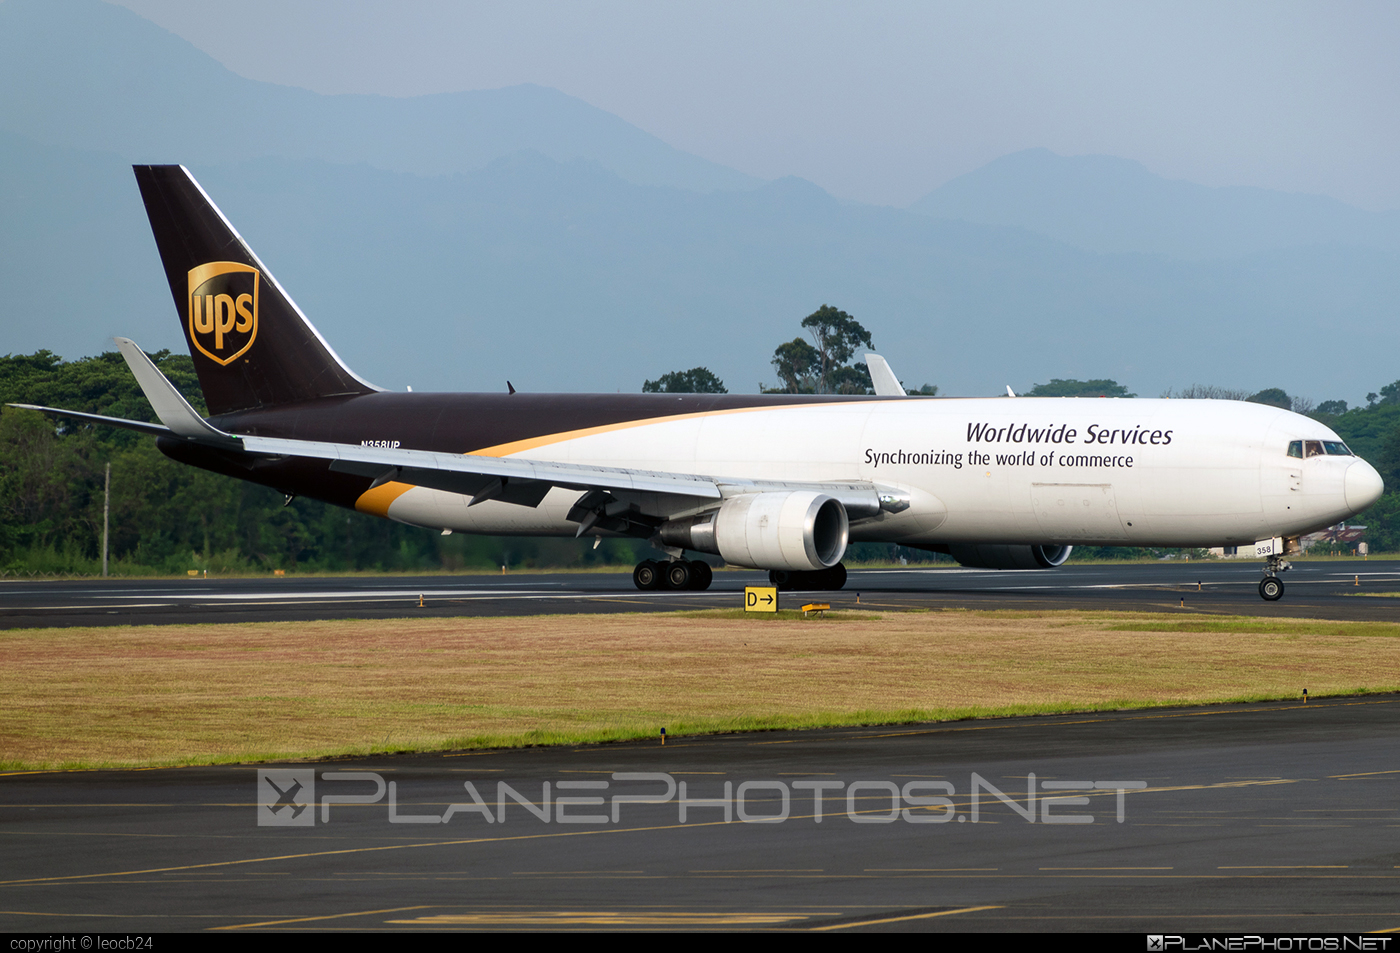 Boeing 767-300F - N358UP operated by United Parcel Service (UPS) #b767 #b767f #b767freighter #boeing #boeing767 #ups #upsairlines